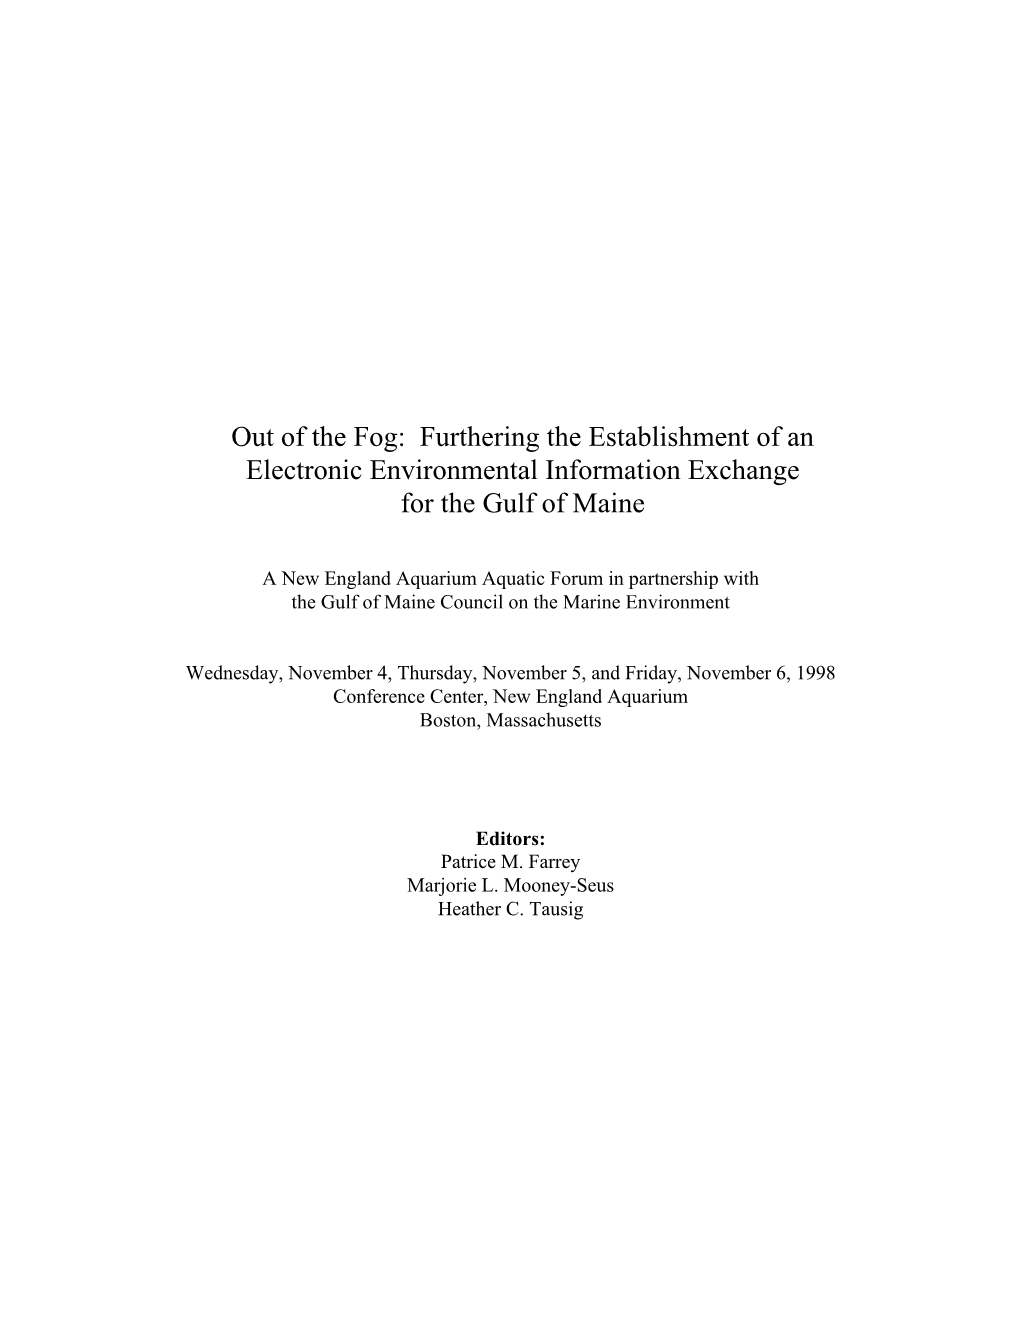 Out of the Fog: Furthering the Establishment of an Electronic Environmental Information Exchange for the Gulf of Maine